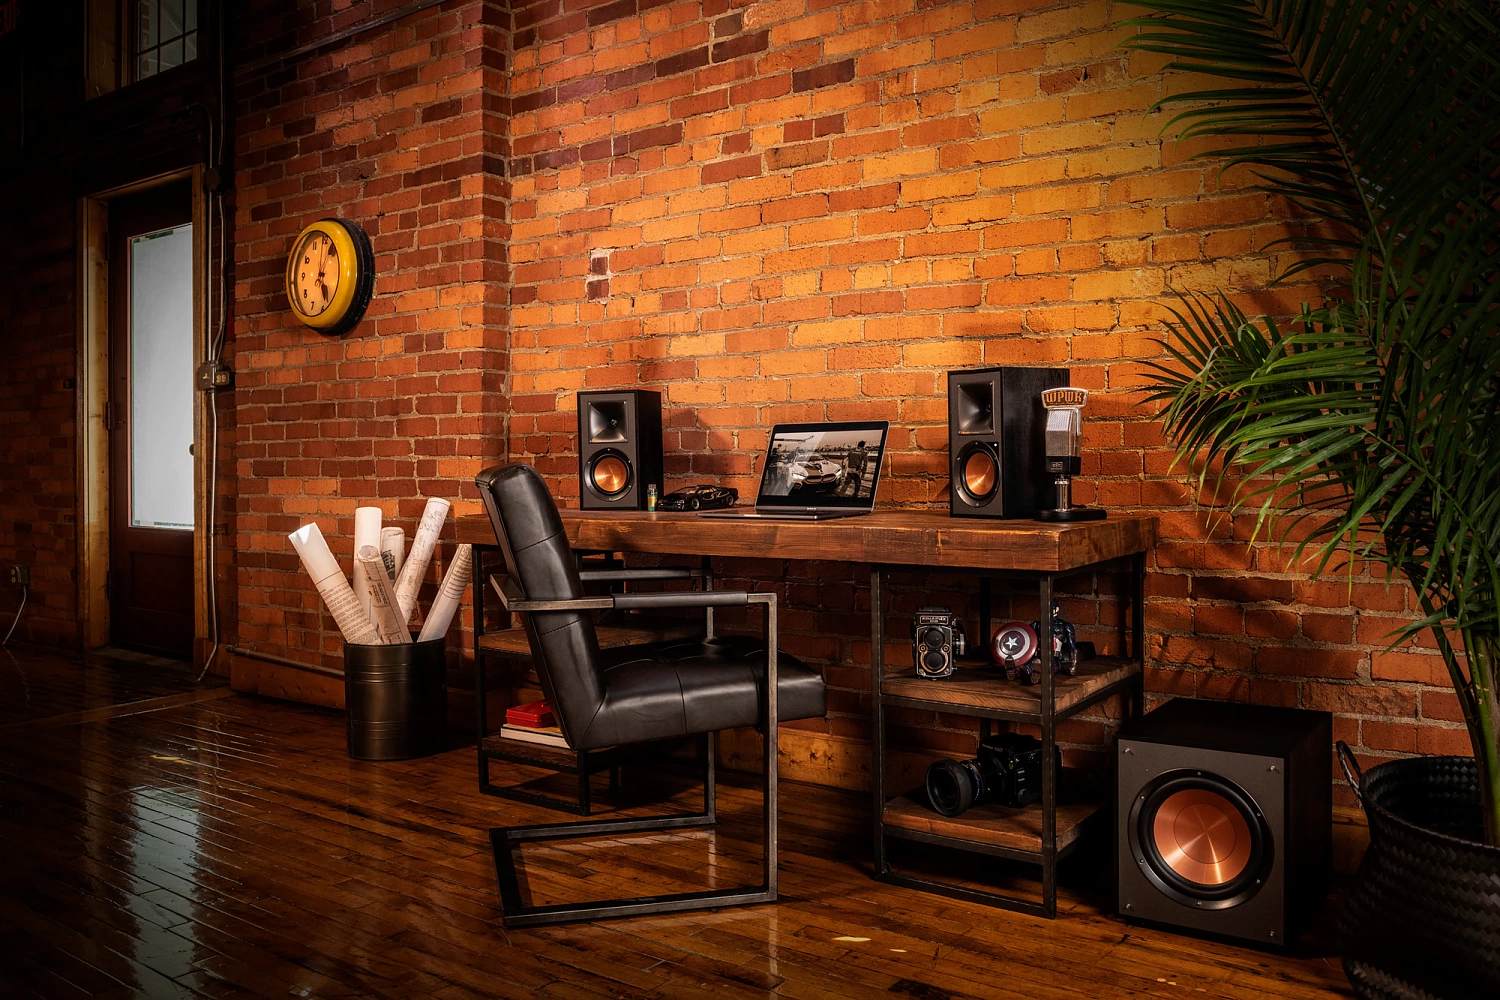 Klipsch Reference R-51PM